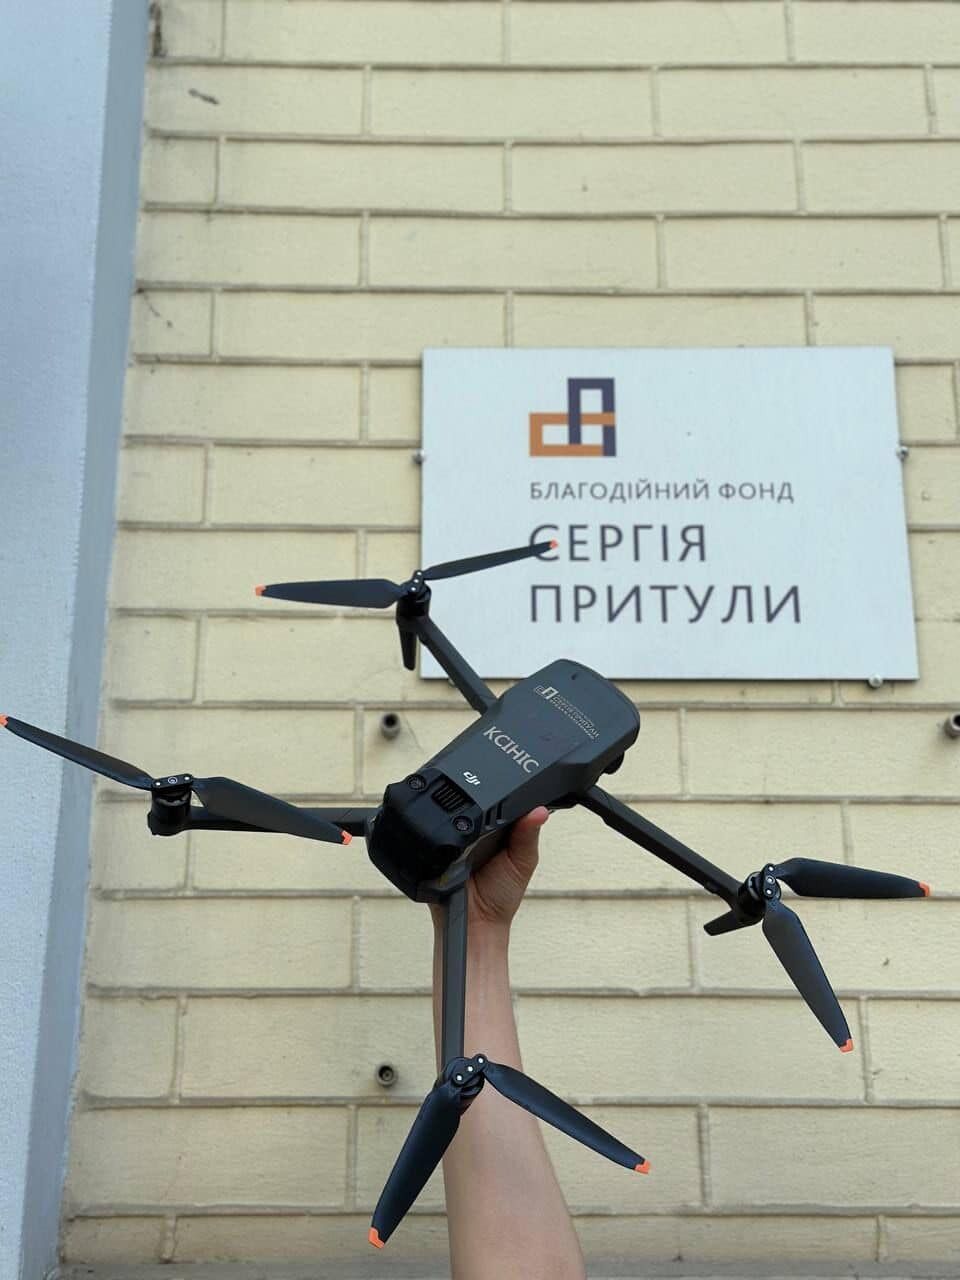 A generation we are proud of: 8-year-old Markiian from Lviv donated 12 dollars for drones for the AFU. Photo